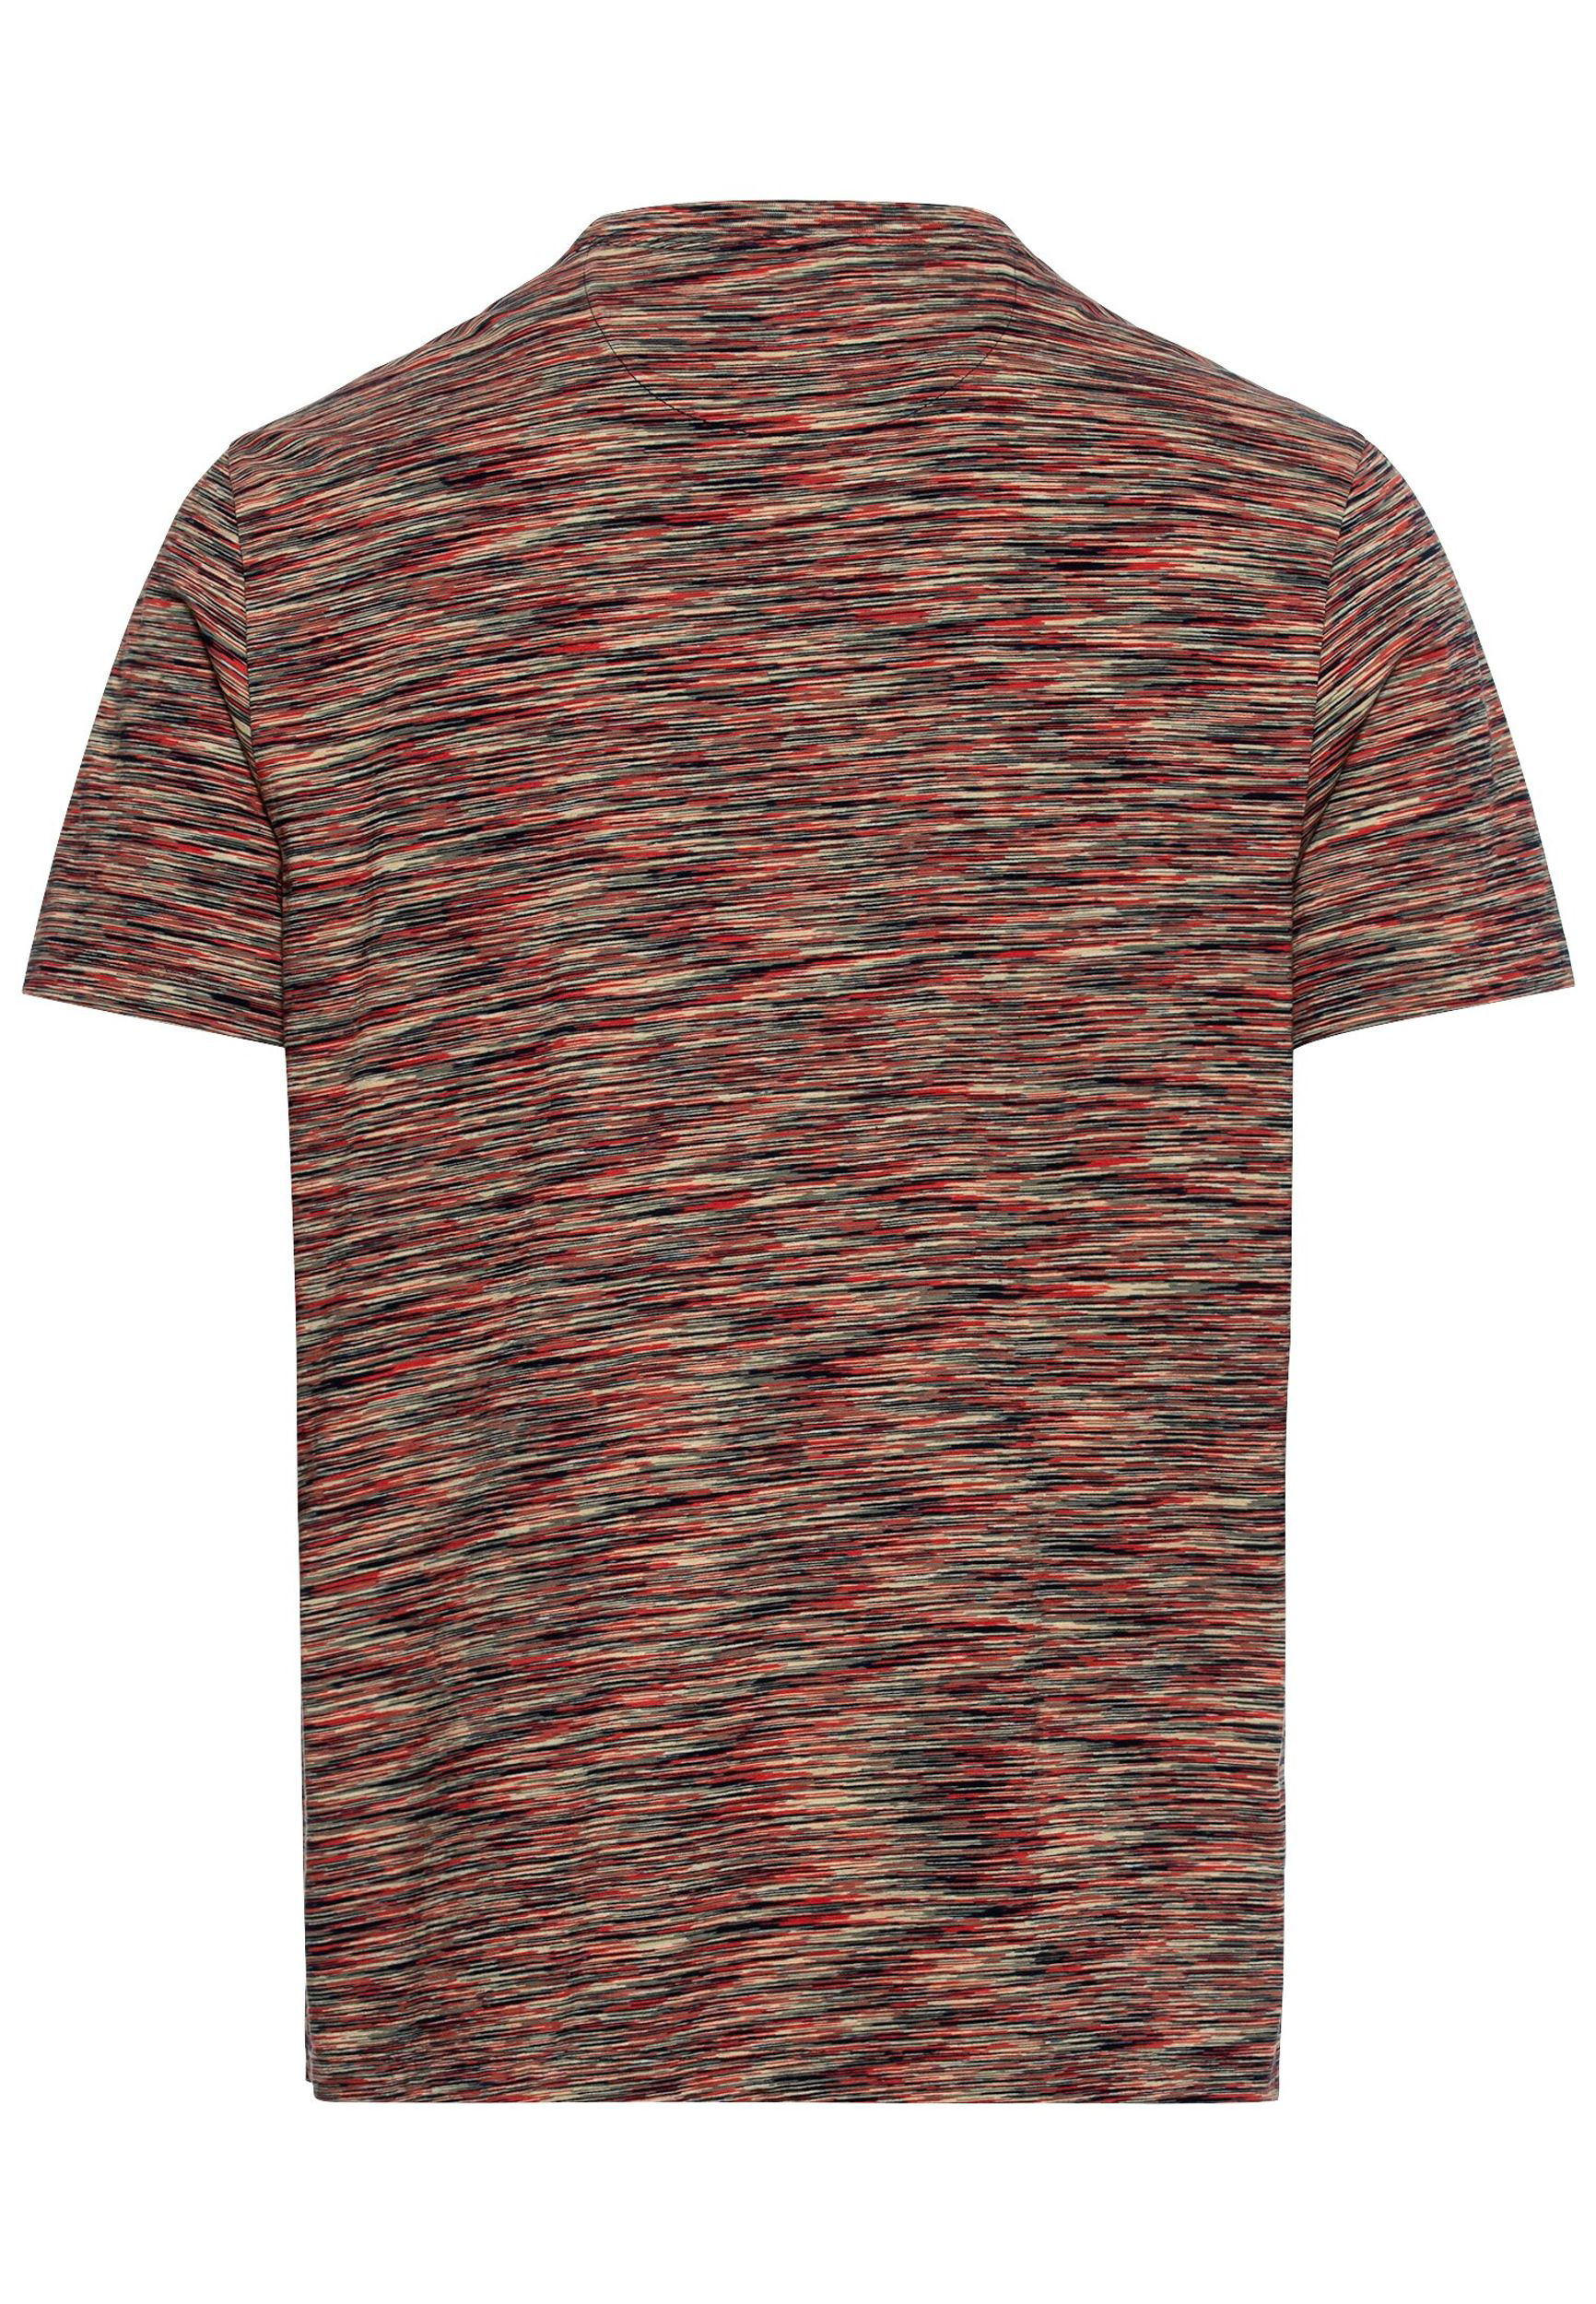 Camel Active |  Camel Active Shirt  | L | faded red